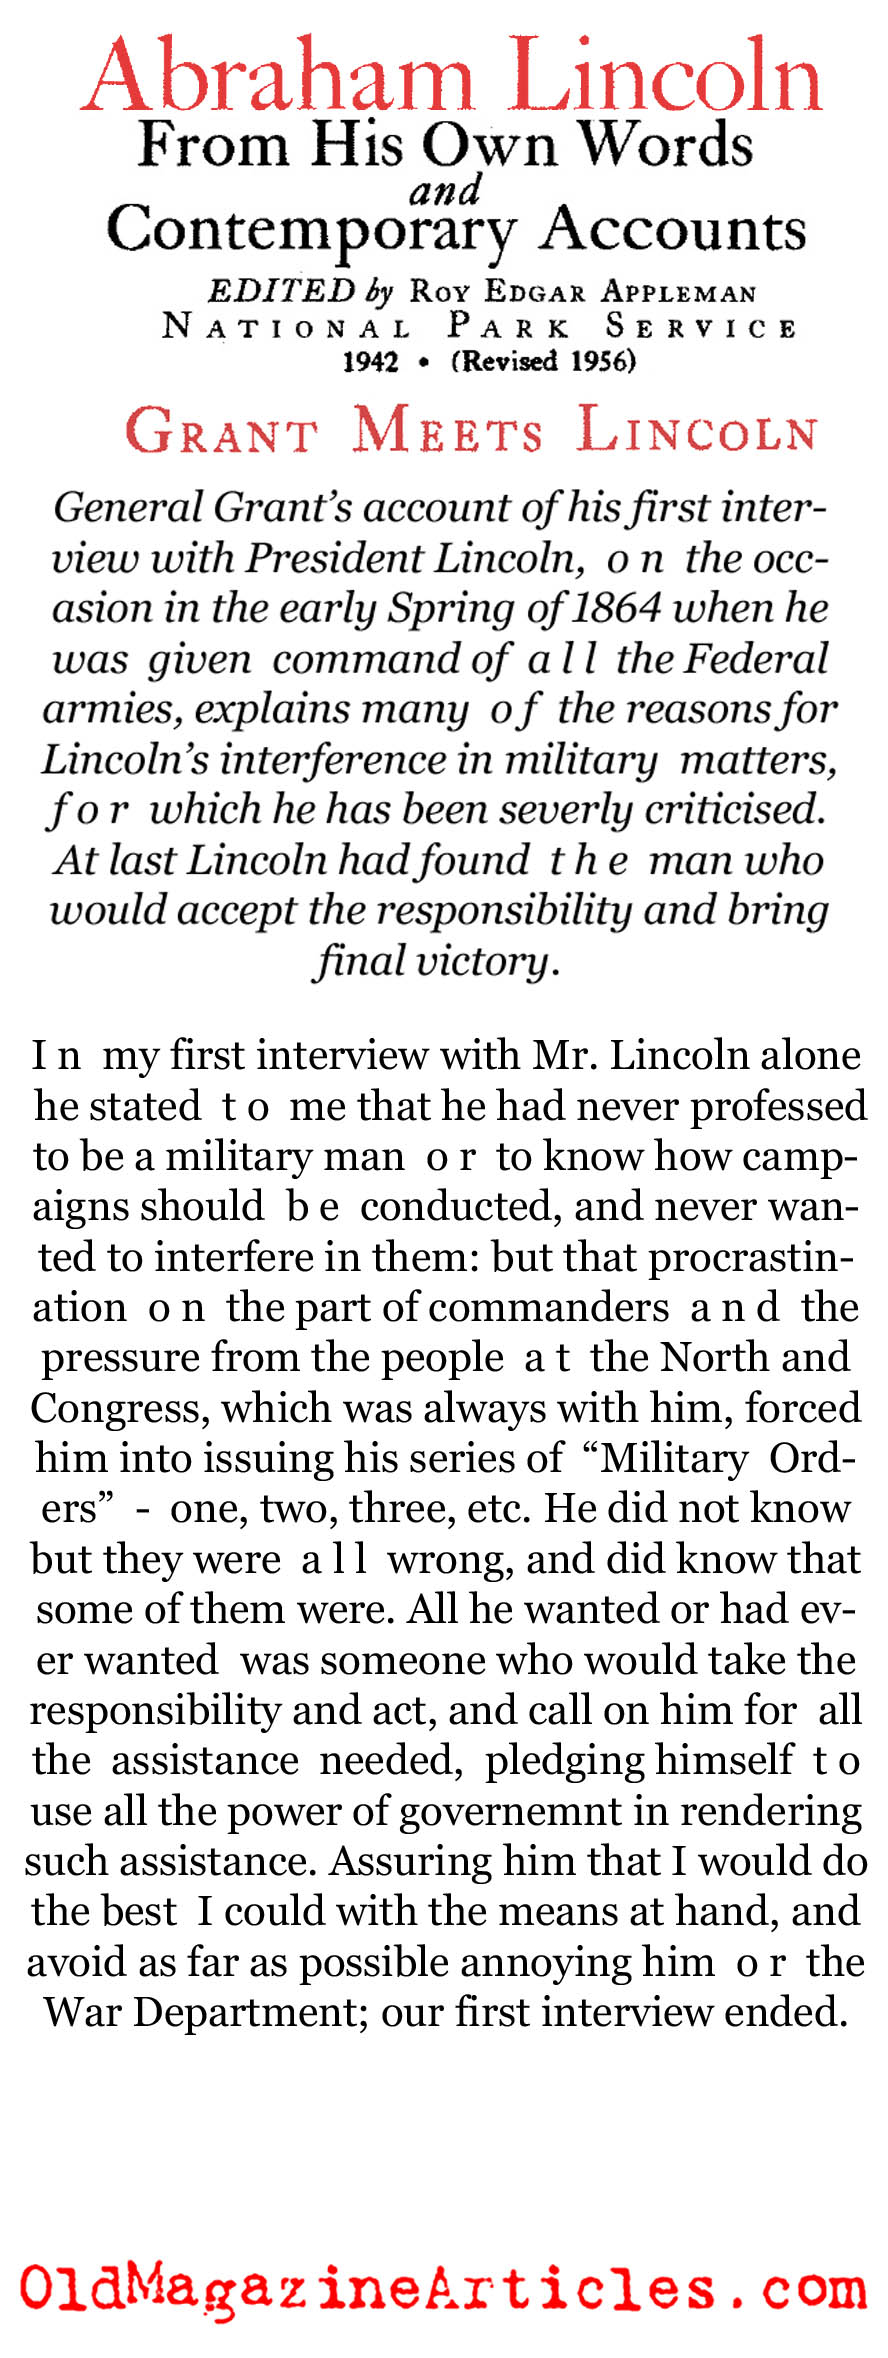 When Grant Met Lincoln for the First Time (National Park Service, 1956)